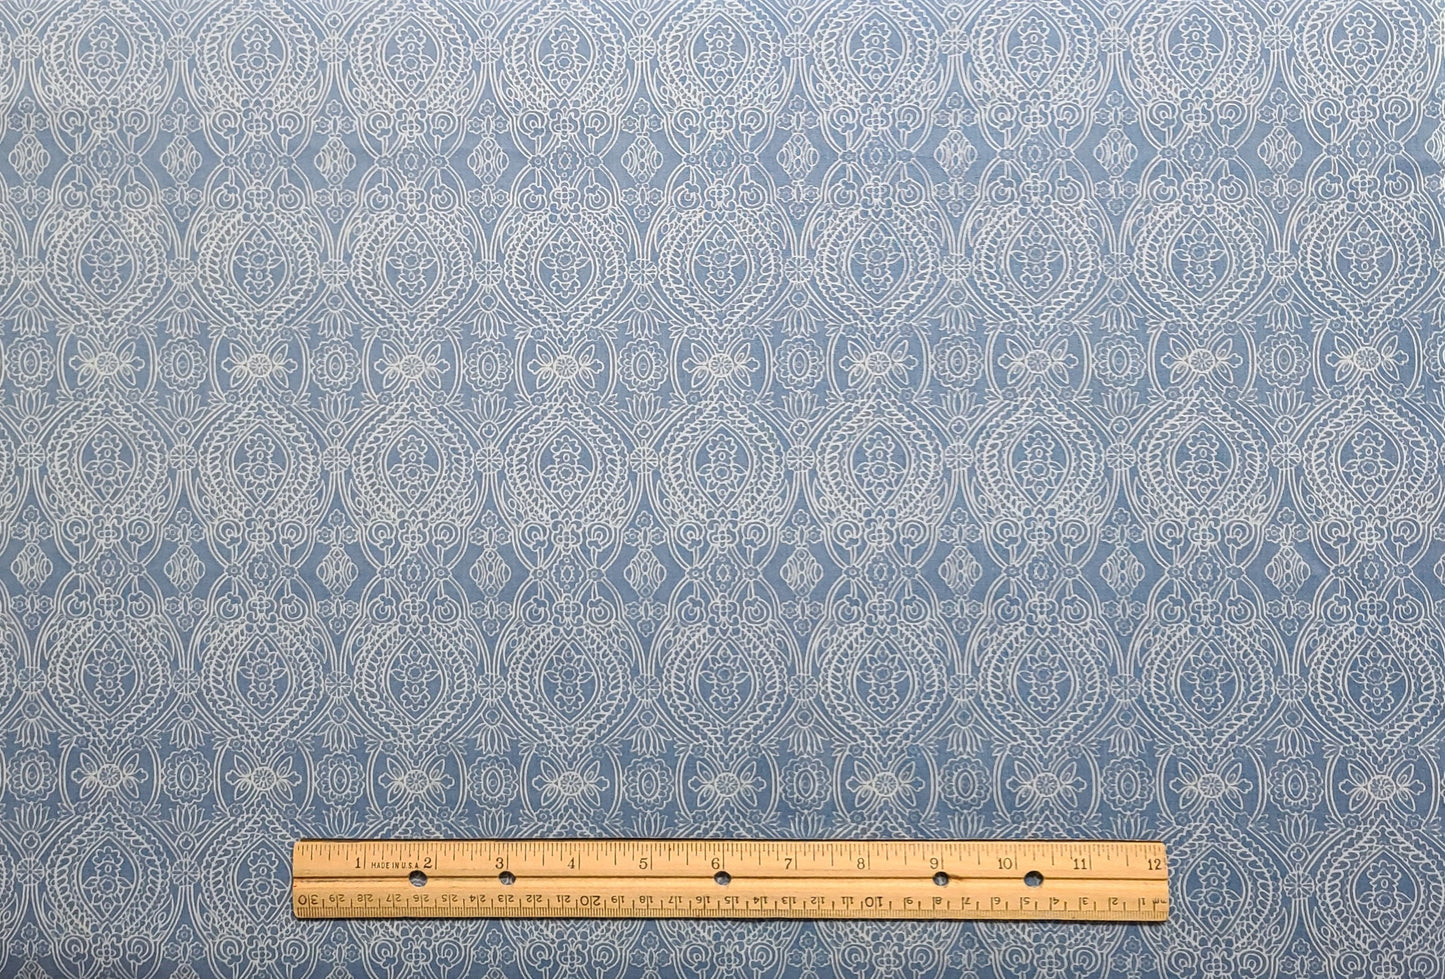 Vintage Lightweight Double-Sided (Same Pattern on Both Sides) Light Blue Fabric / White Medallion Print - Selvage to Selvage Print